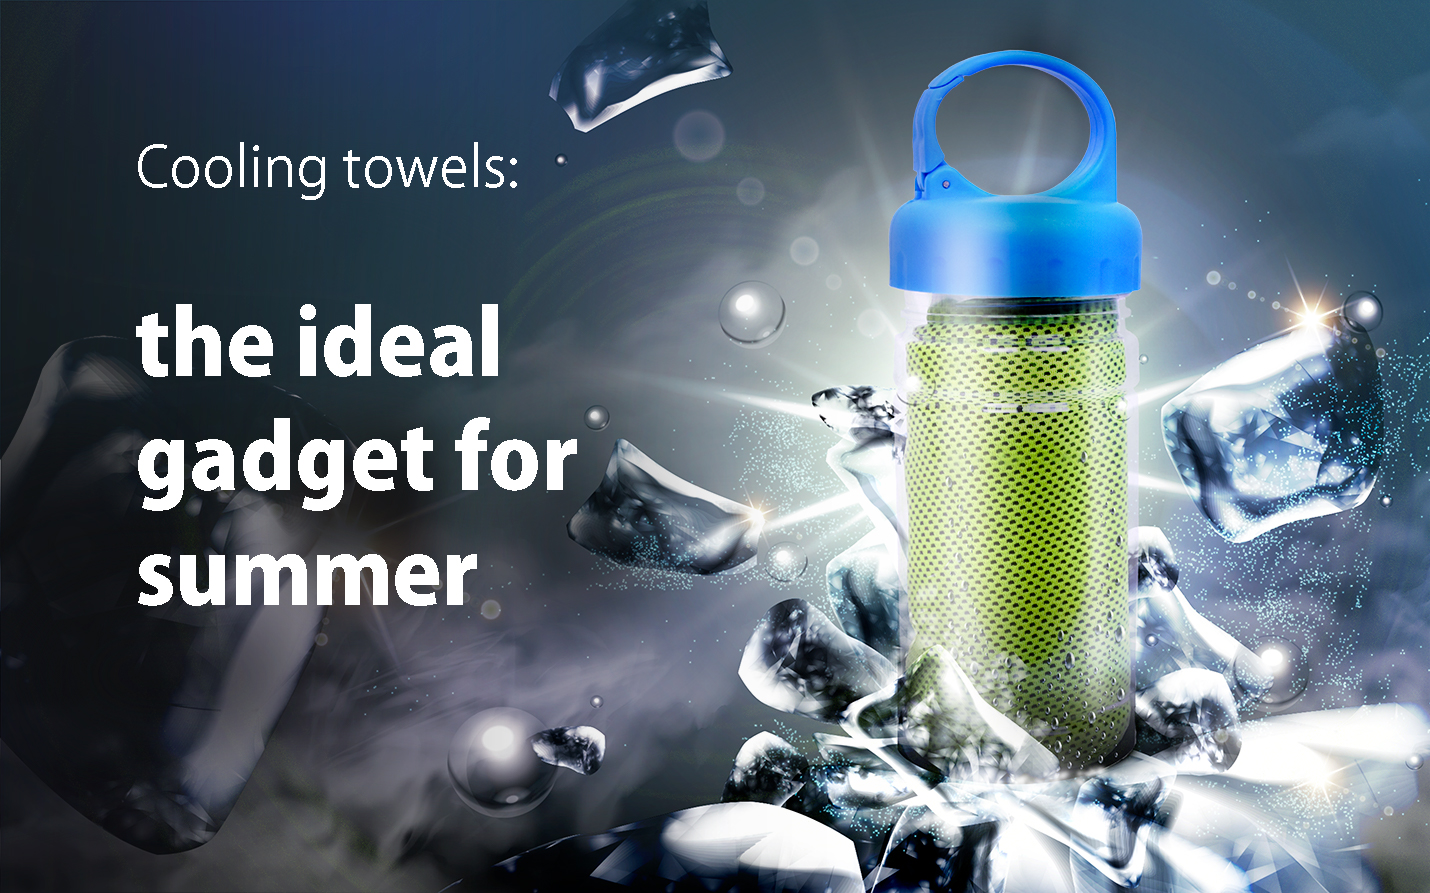 Cooling towels: the ideal gadget for summer